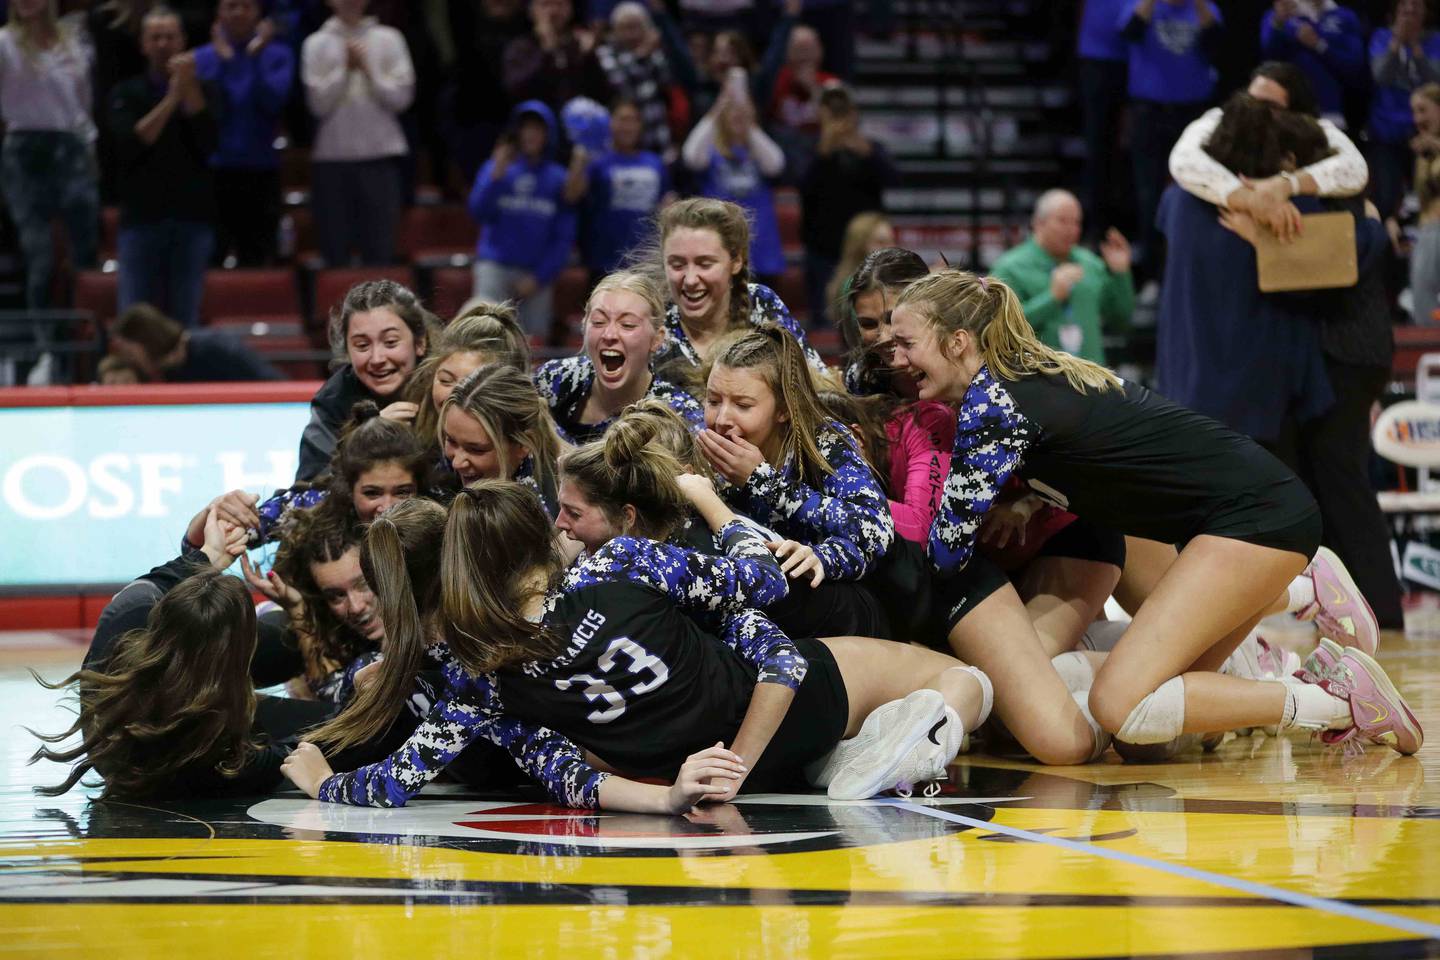 St. Francis celebrates after their win in the IHSA Class 3A girls volleyball state championship game between St. Francis and Nazareth Academy Saturday November 12, 2022 at Redbird Arena in Normal.